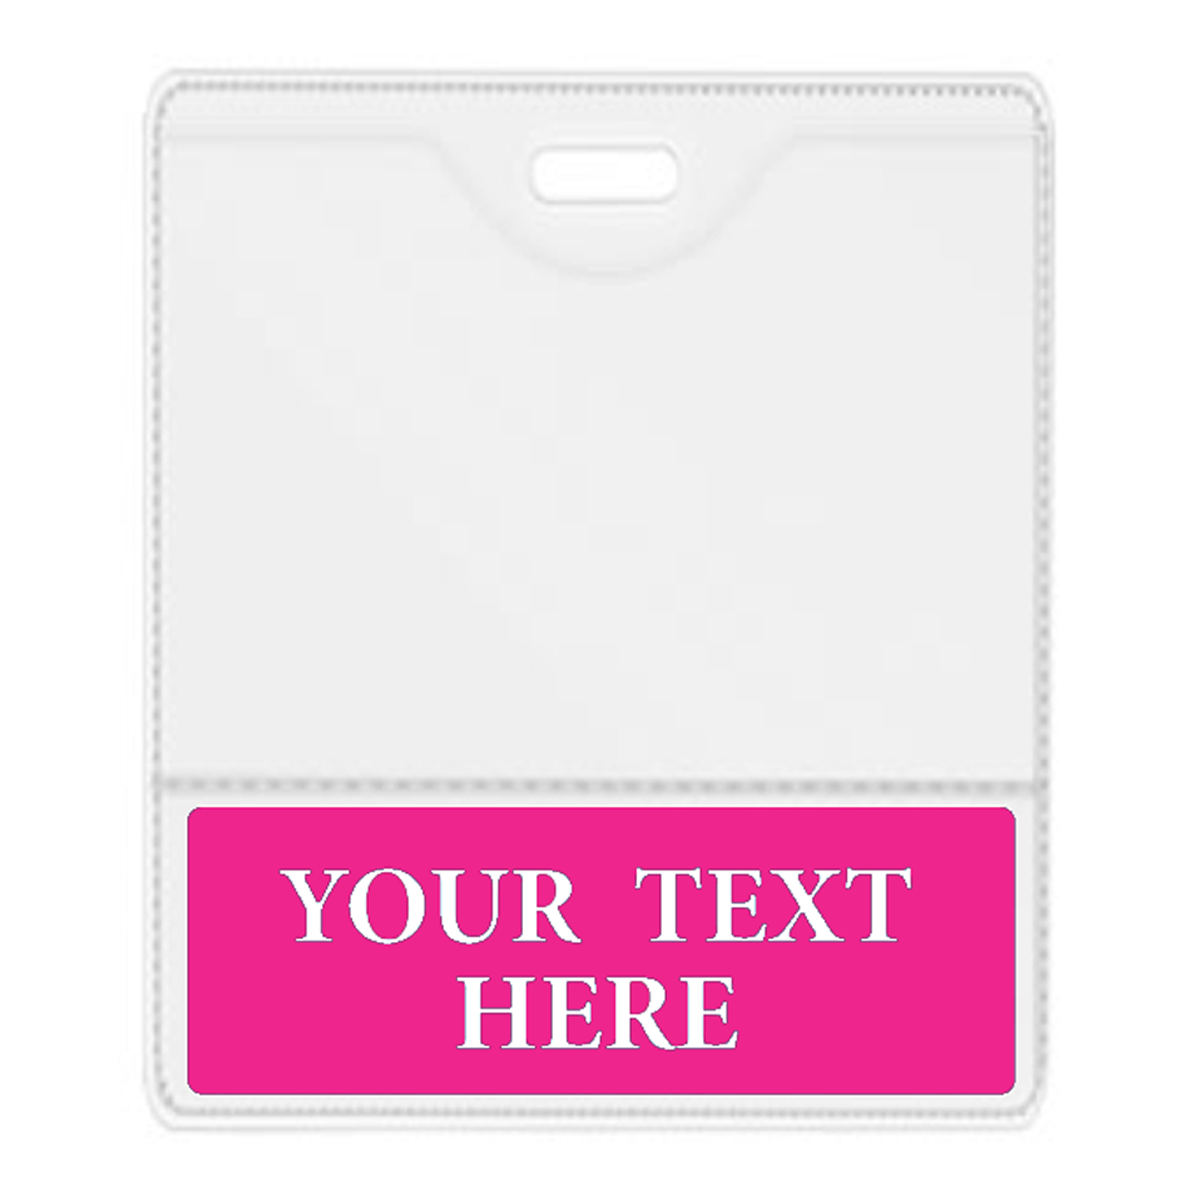 Custom Printed BadgeBottoms® Horizontal (Badge Holder & Badge Buddy IN ONE) featuring an empty placeholder for text, and a prominent pink section at the bottom displaying the customizable title "YOUR TEXT HERE" in white, capitalized lettering.